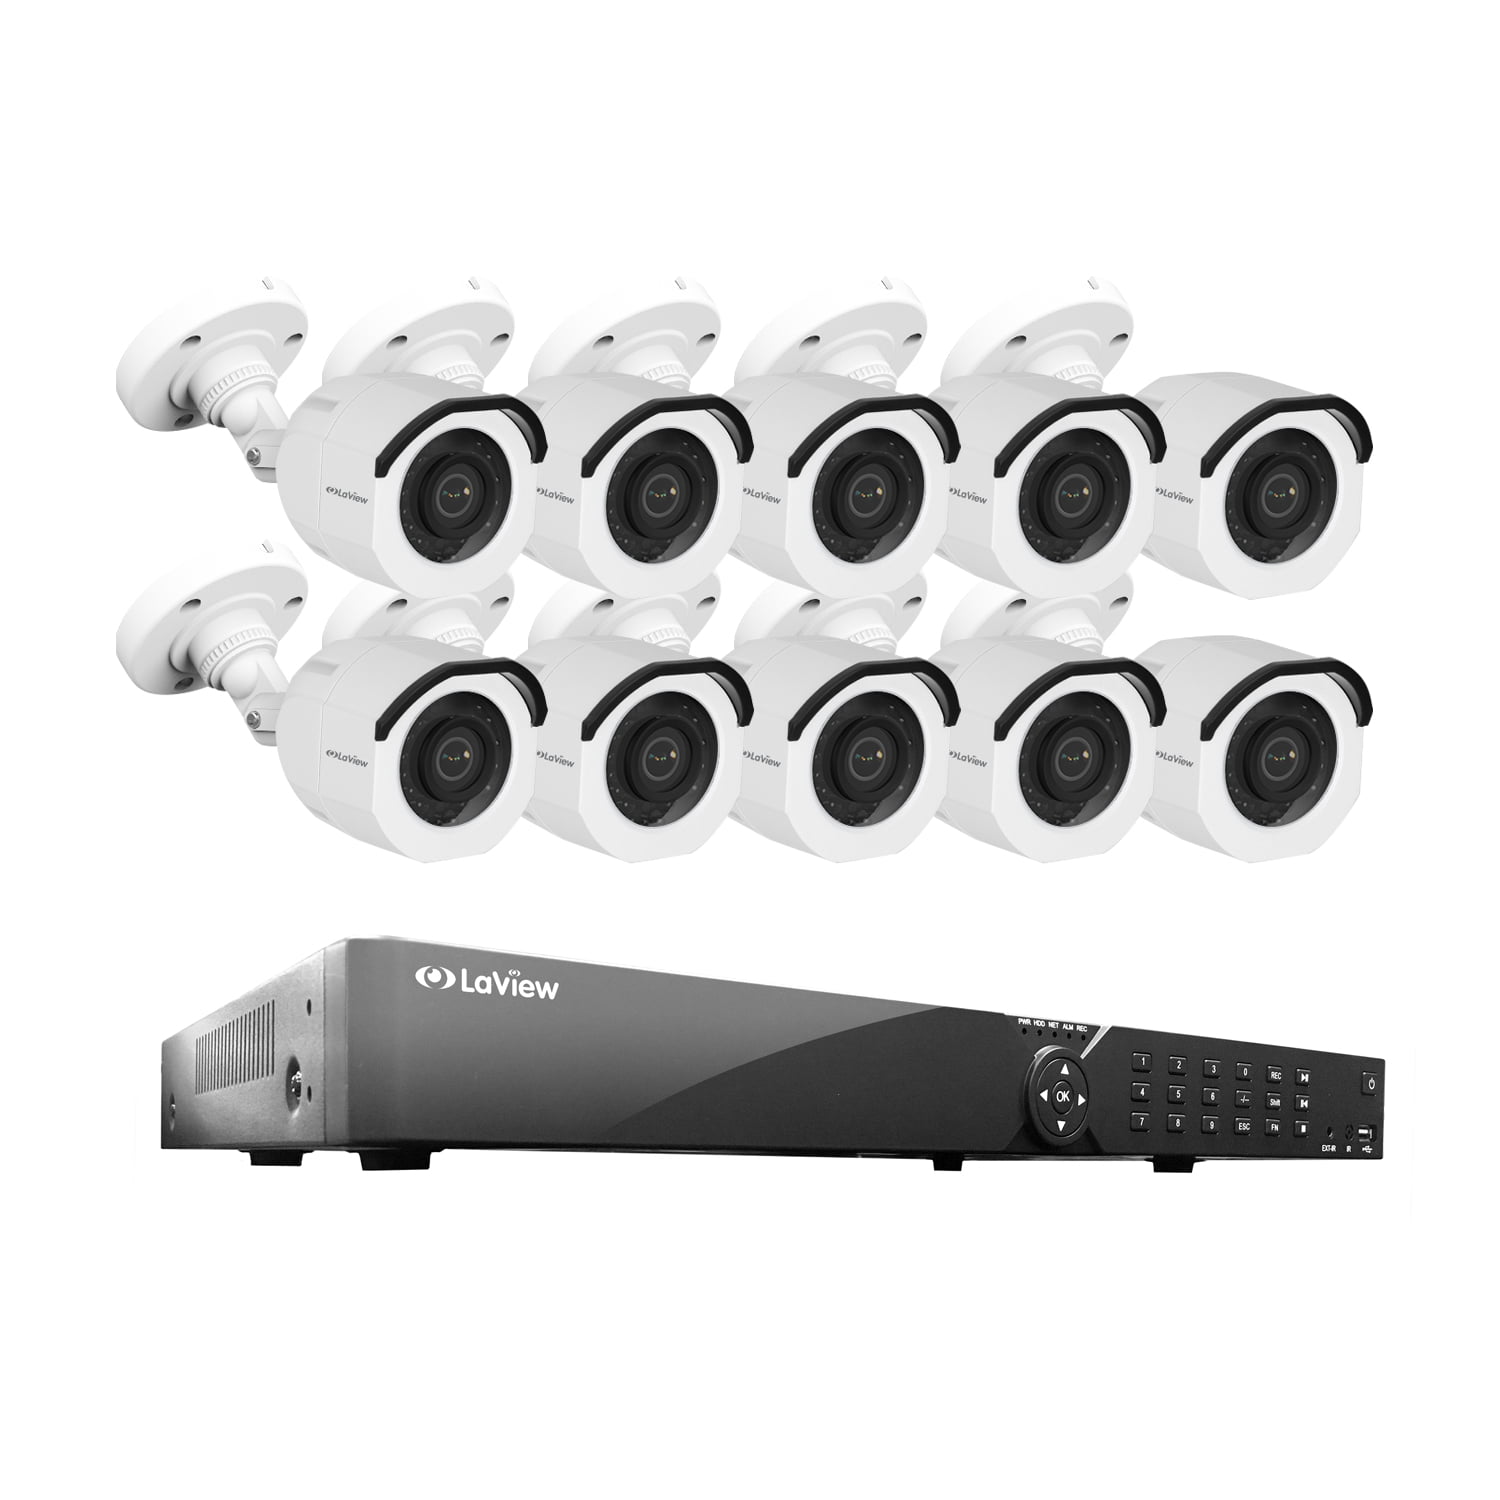 LaView 16 Channel DVR Security System W 